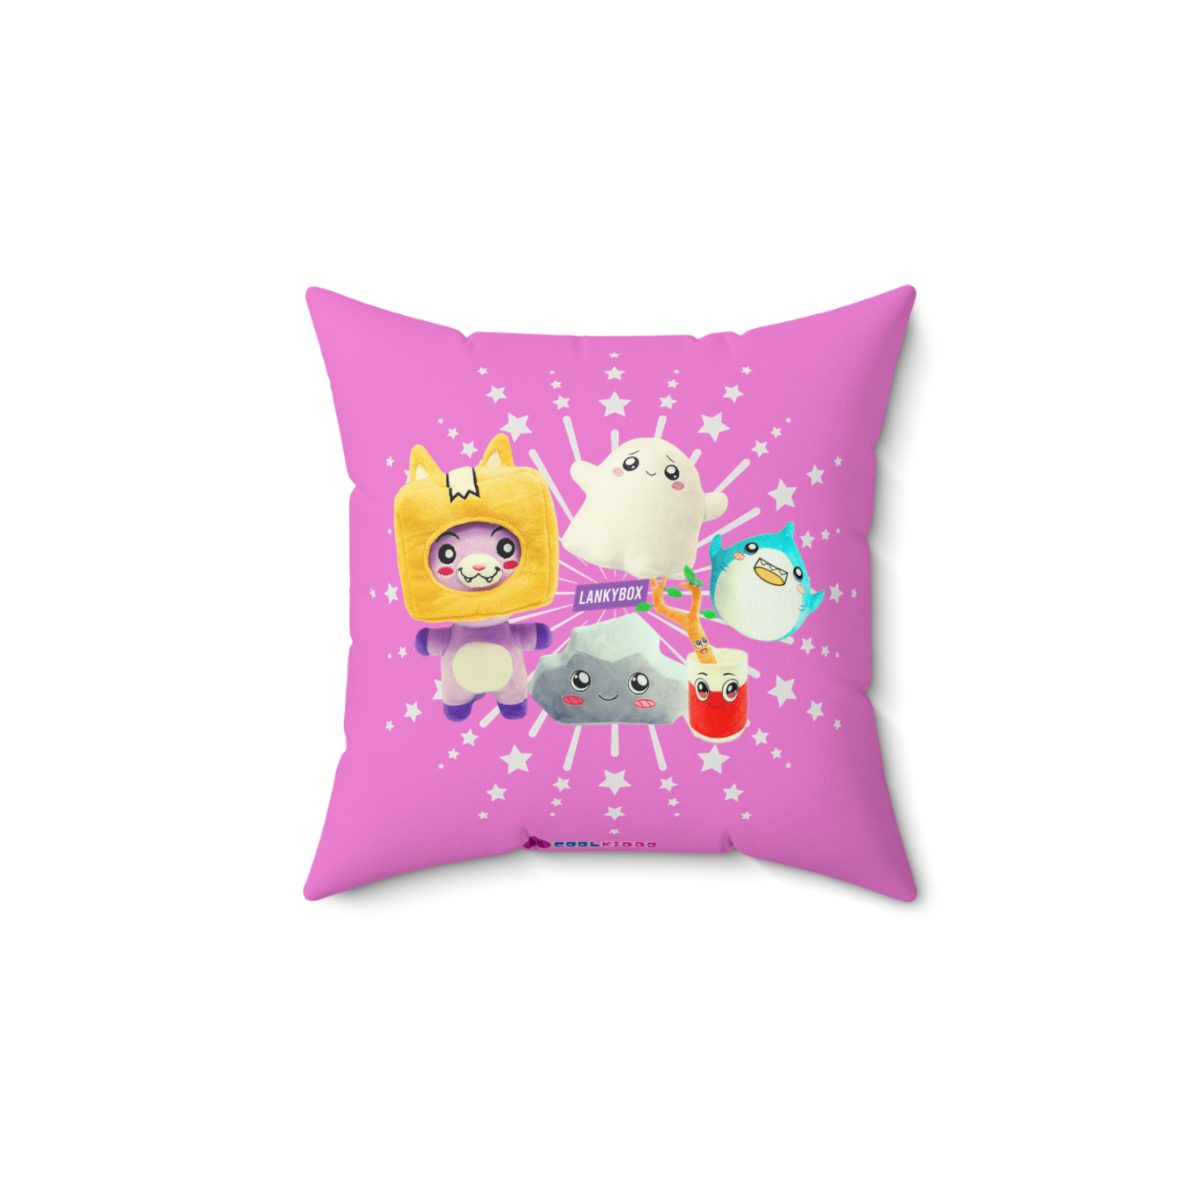 Lankybox Cute Characters Pink Cushion: Double-Sided Print Cool Kiddo 14